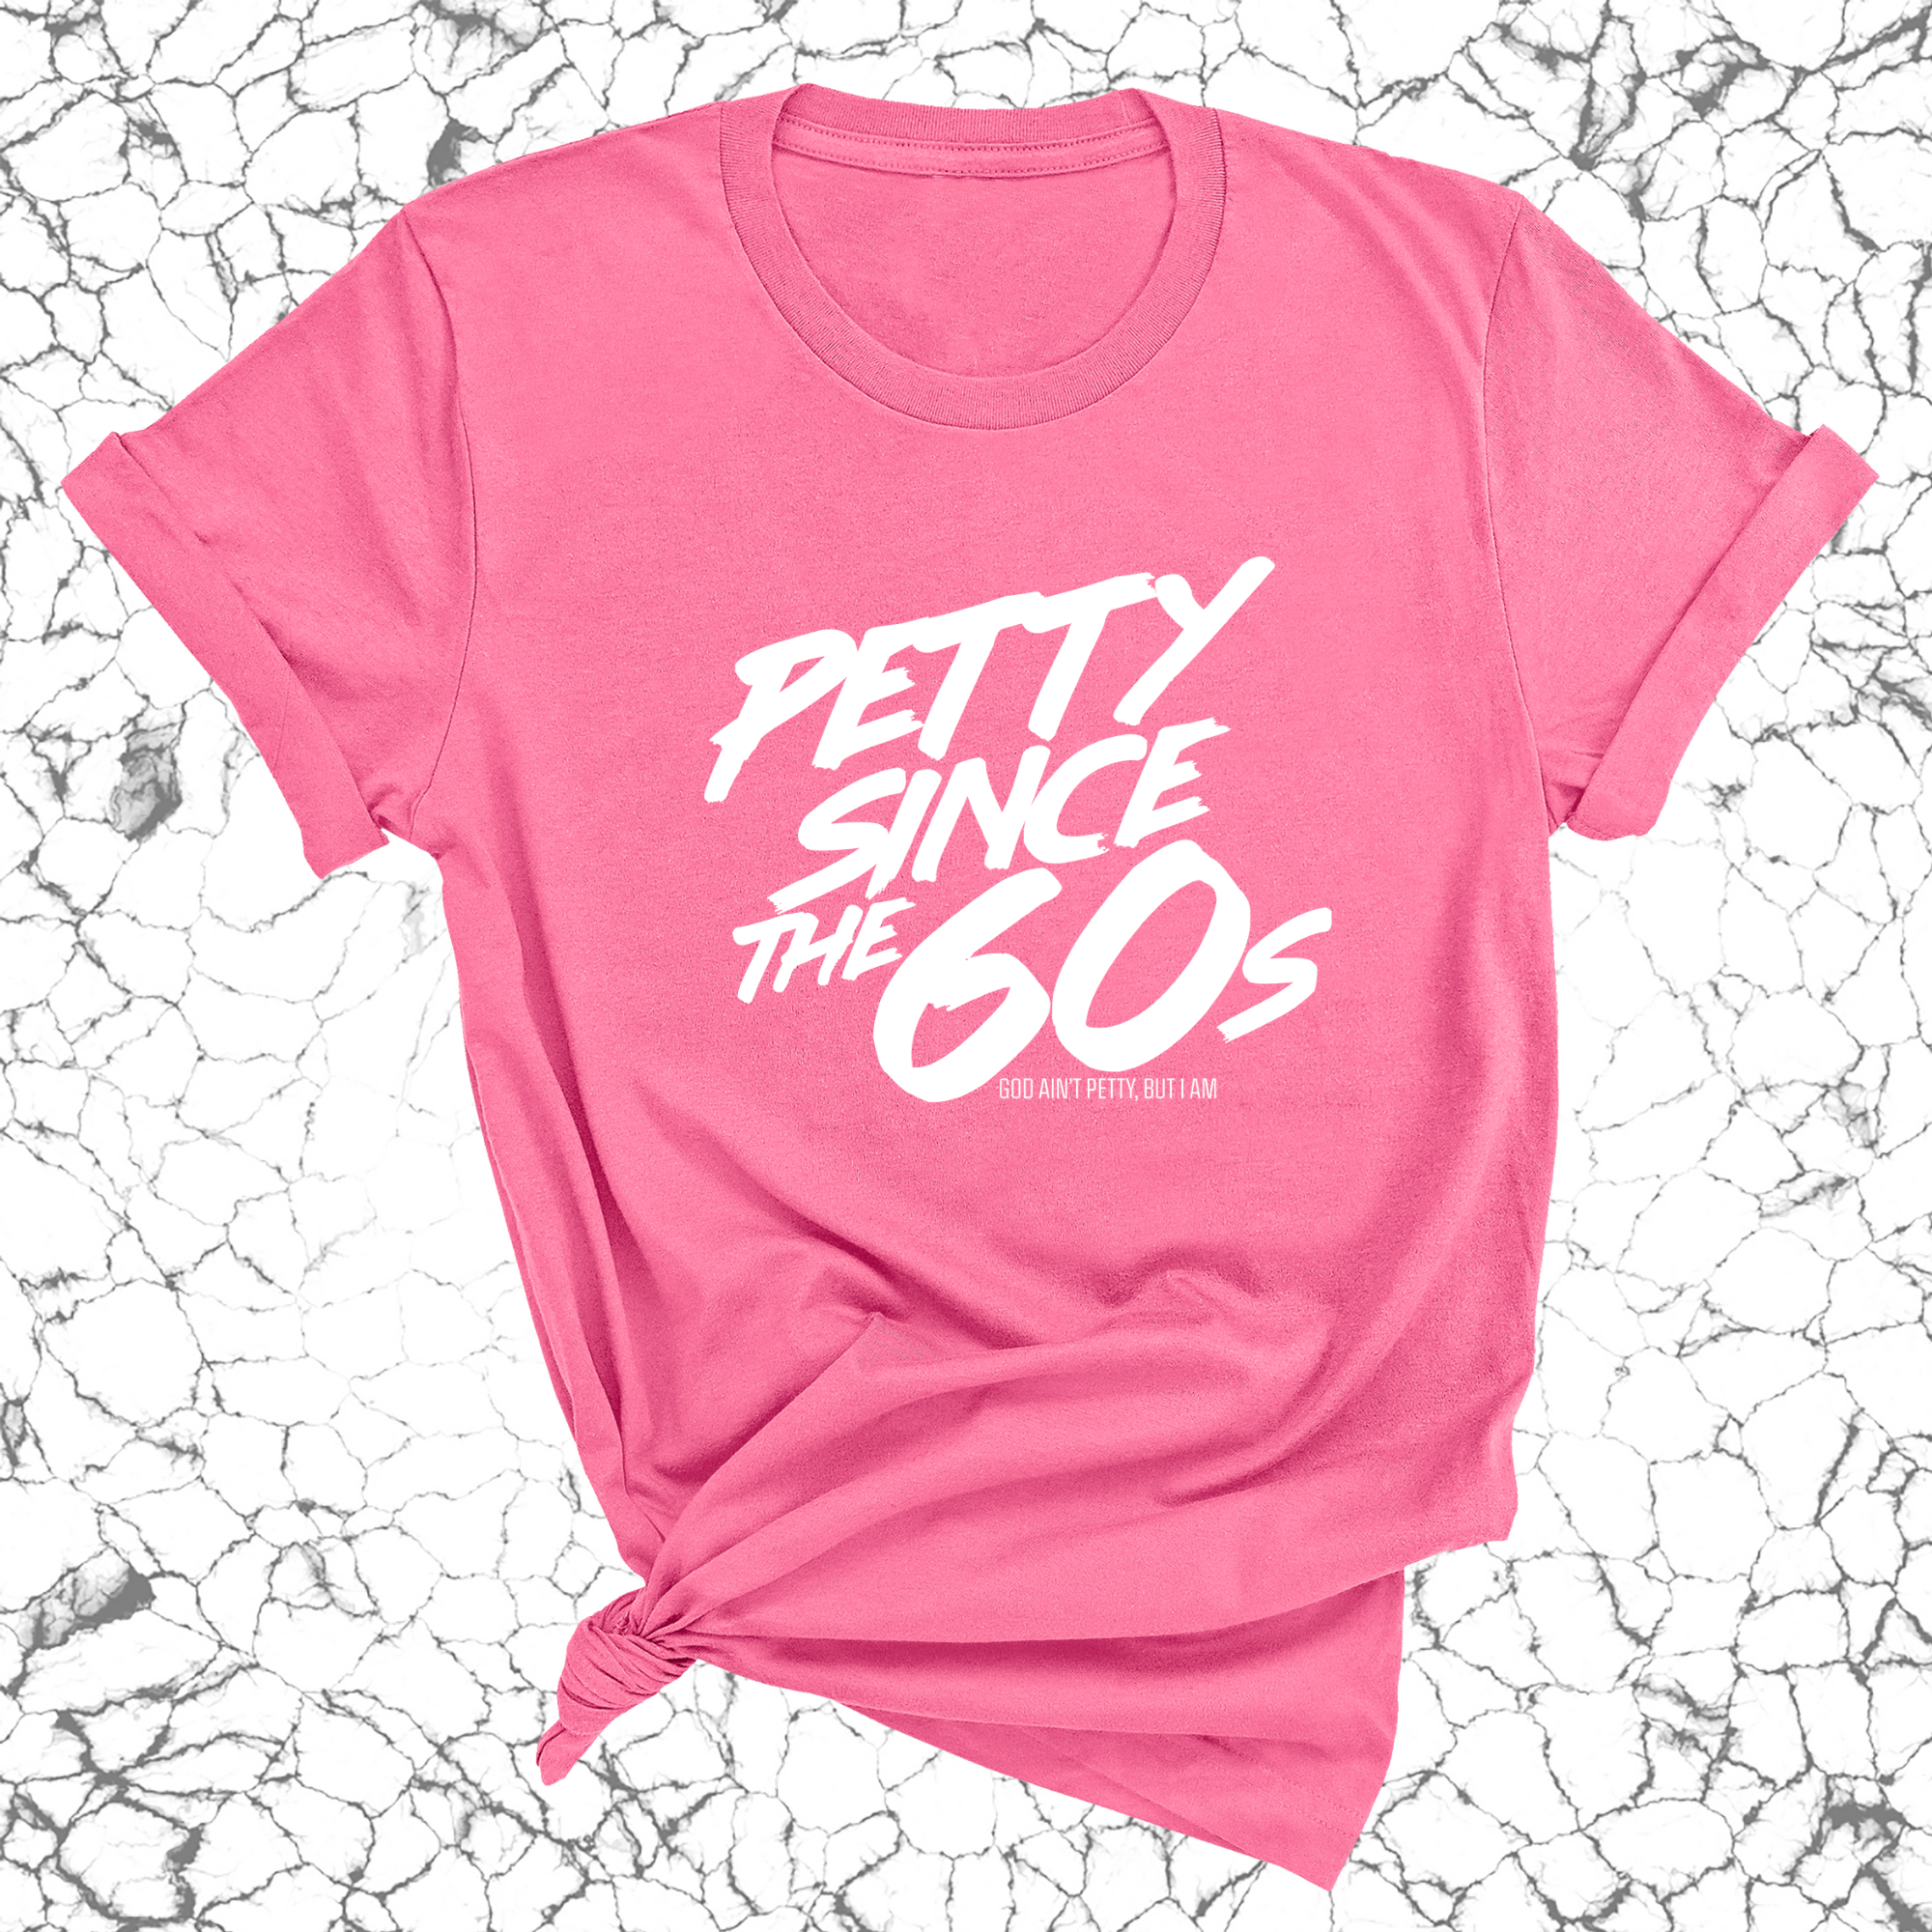 Petty Since the 60s Unisex Tee-T-Shirt-The Original God Ain't Petty But I Am